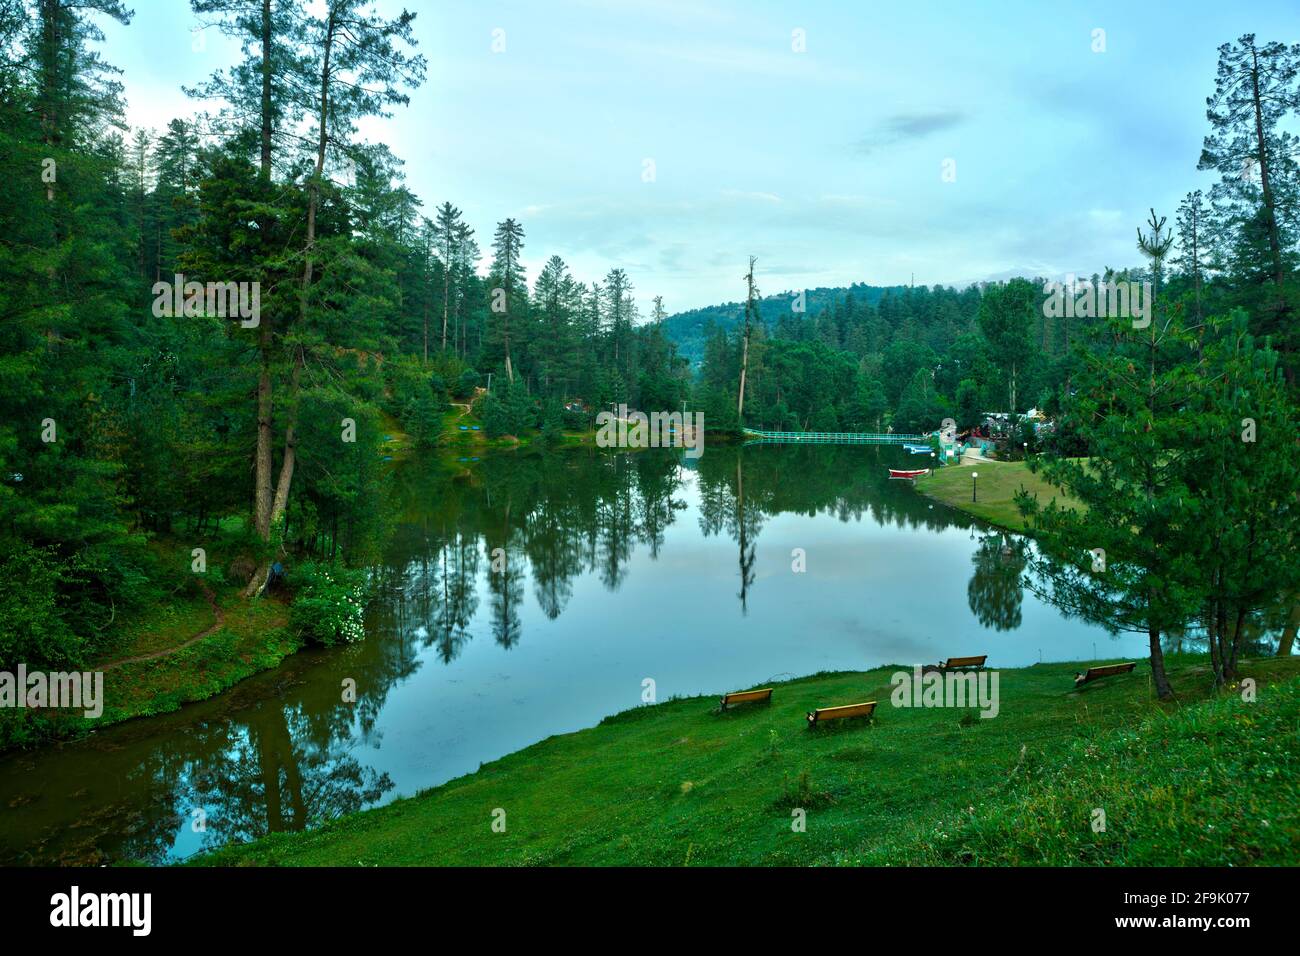 Pine and Deciduous forest reflection in Banjosa Lake in Rawalakot District of Pakistan Administered Kashmir known as Azad Kashmir. Stock Photo